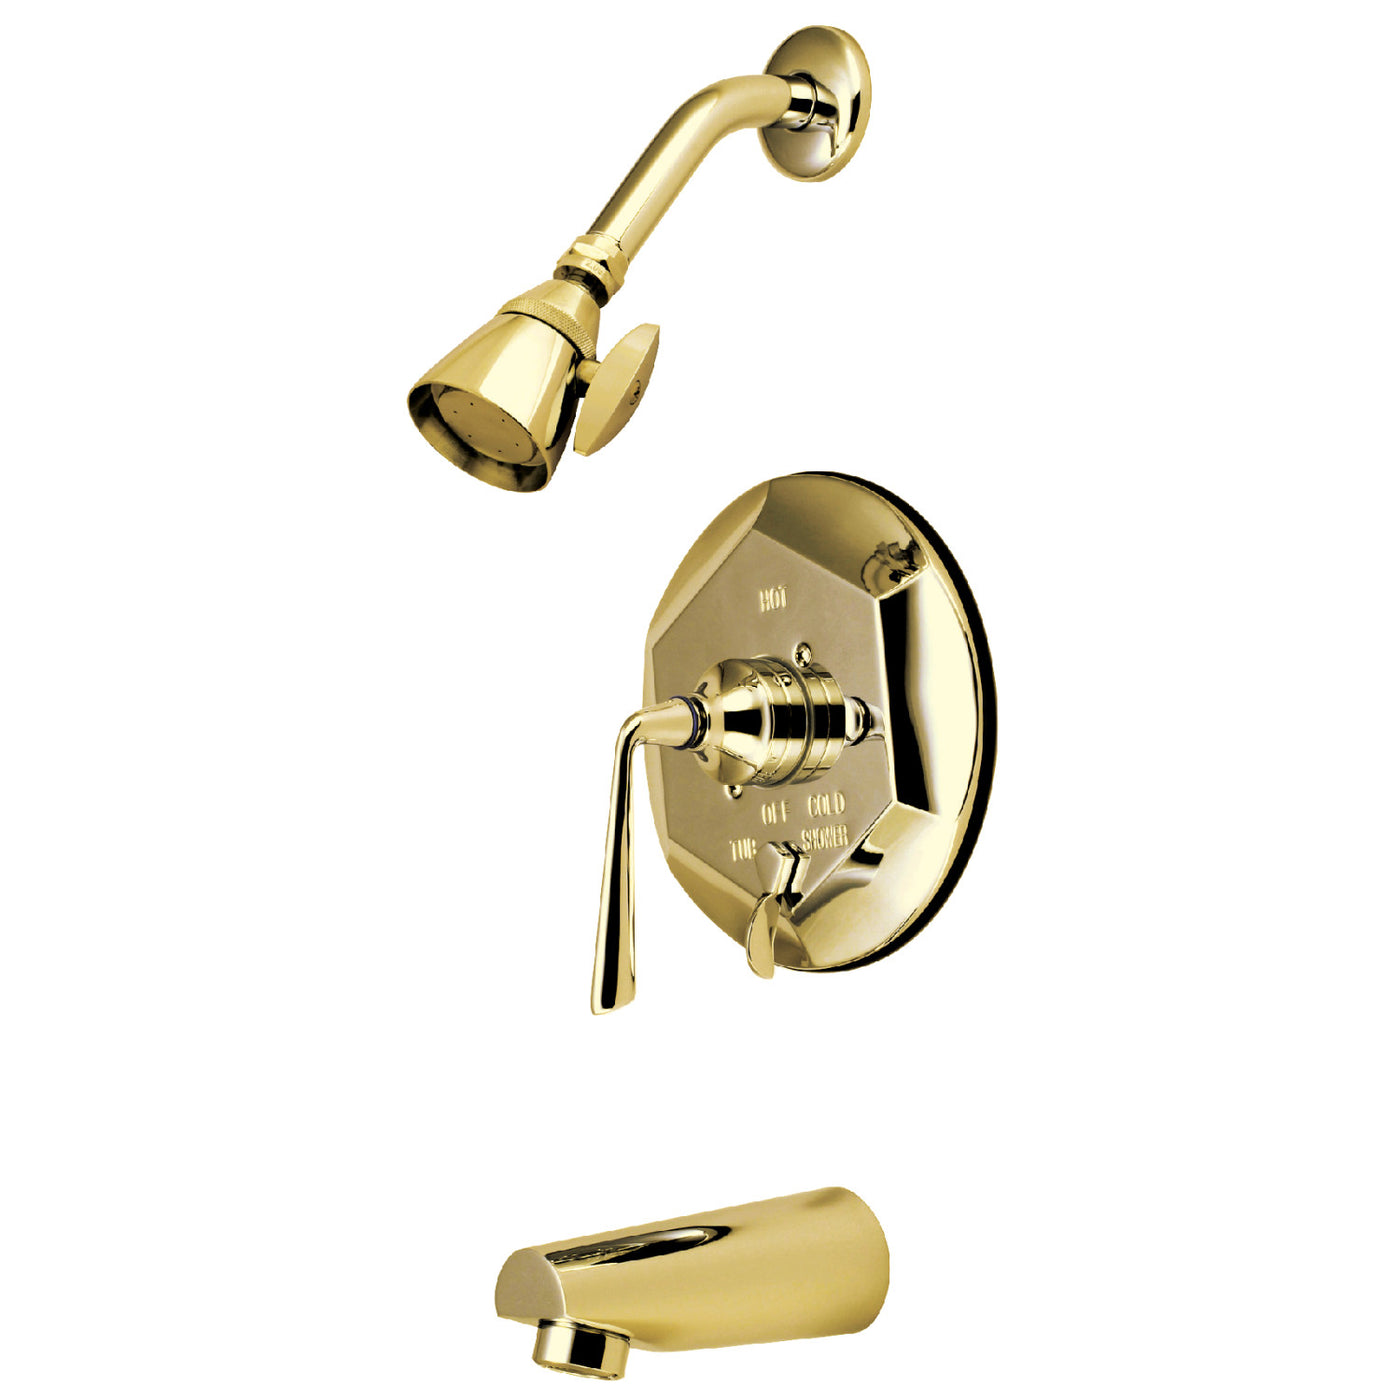 Elements of Design EB46320ZL Tub and Shower Faucet, Polished Brass